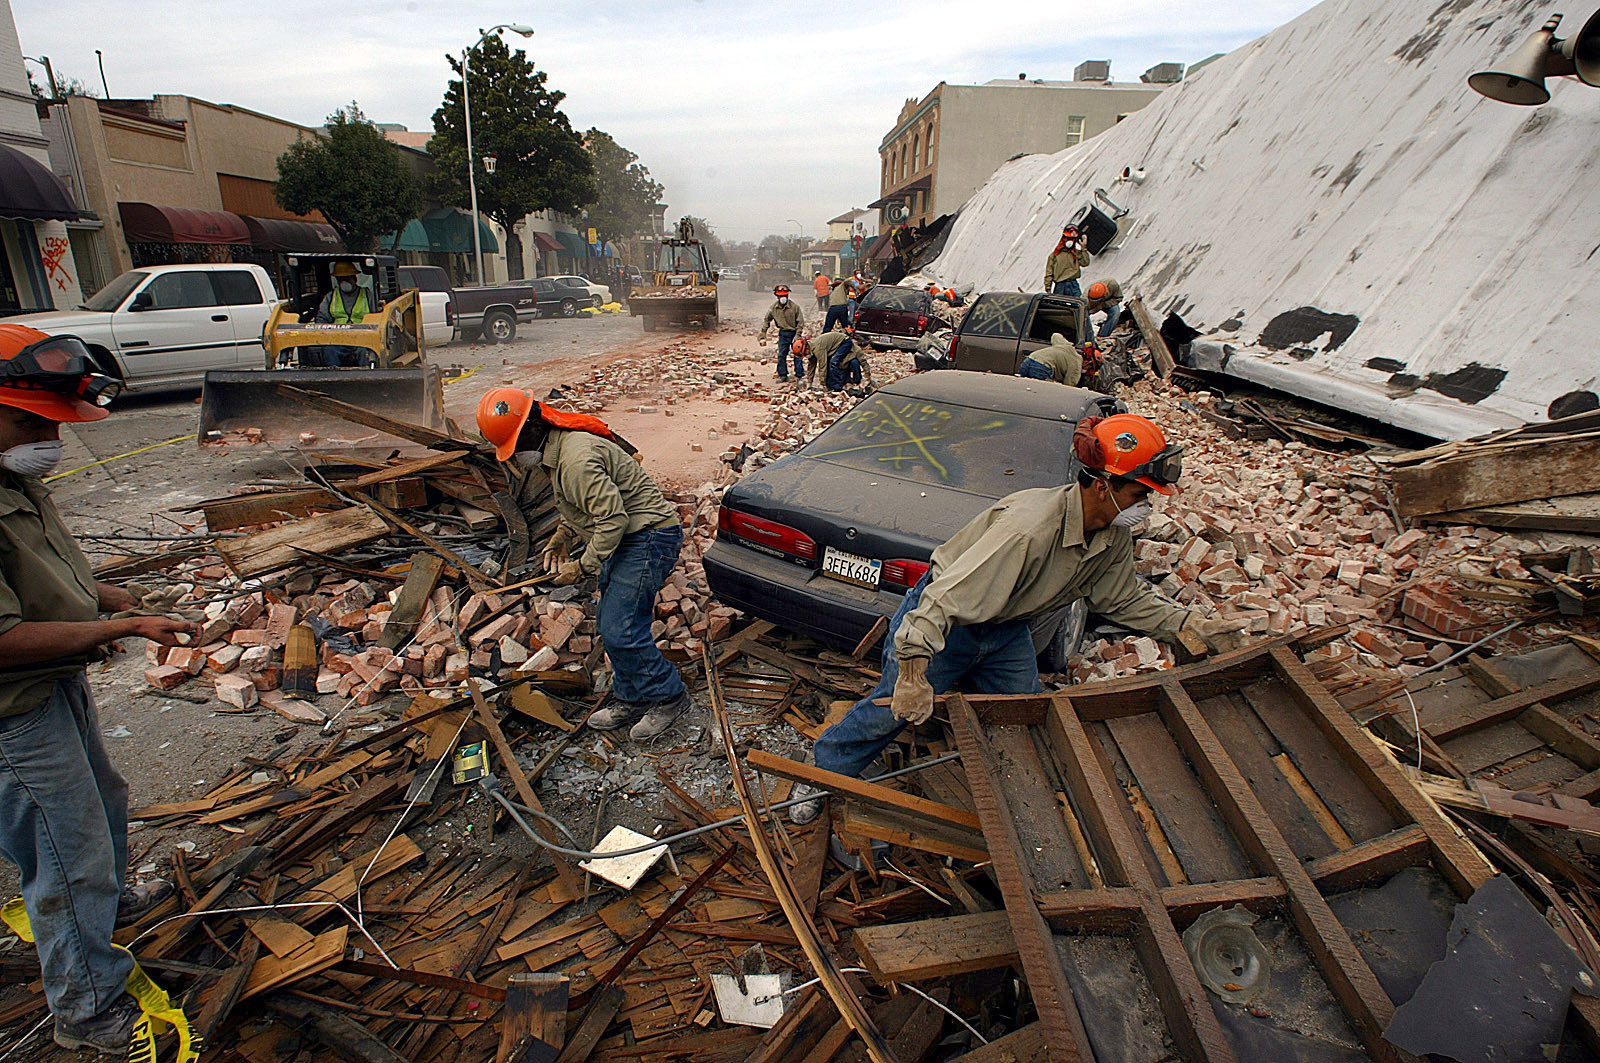 Rescue workers sift through the debris of an unretrofitted brick building in the wake of the 2003 Paso Robles earthquake. Two women who worked in the building died as they tried to flee.